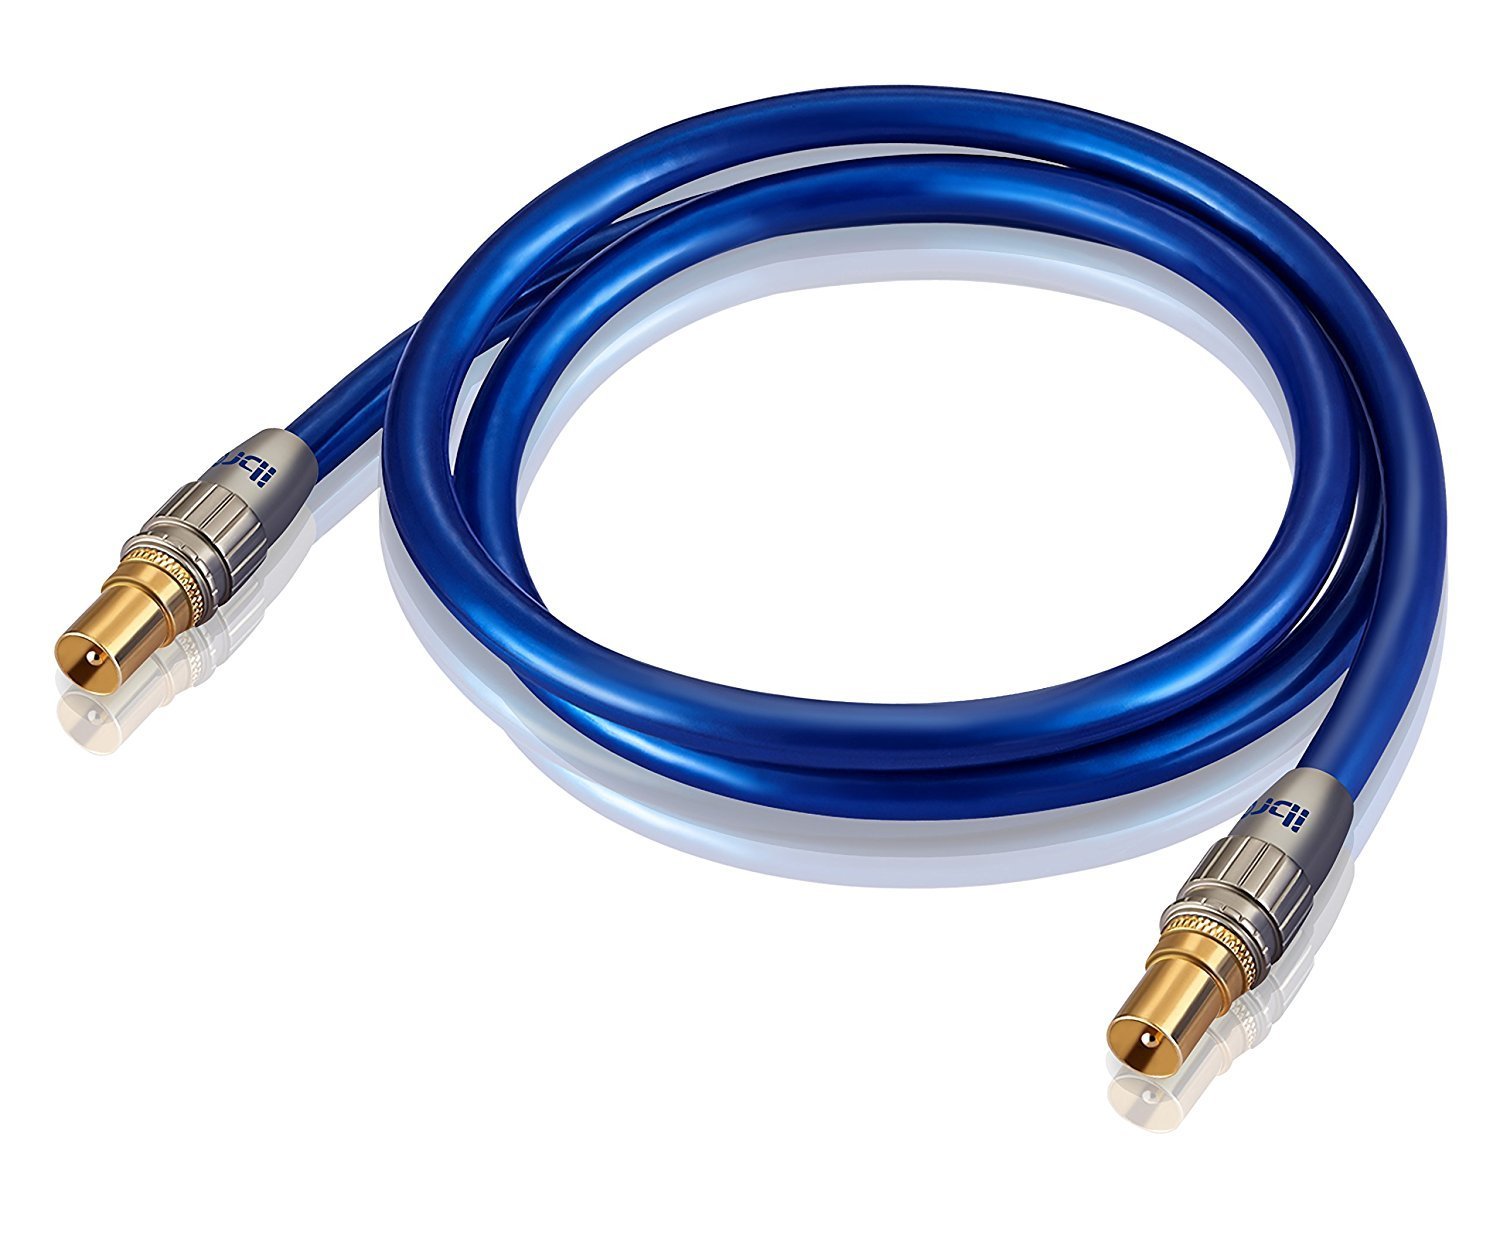 15M HDTV Antenna Cable | TV Aerial Cable | Premium Freeview Coaxial Cable | Connectors: Coax Male to Coax Male | For UHF / RF TVs, VCRs, DVD players, DVRs, cable boxes and satellite | IBRA Blue Gold